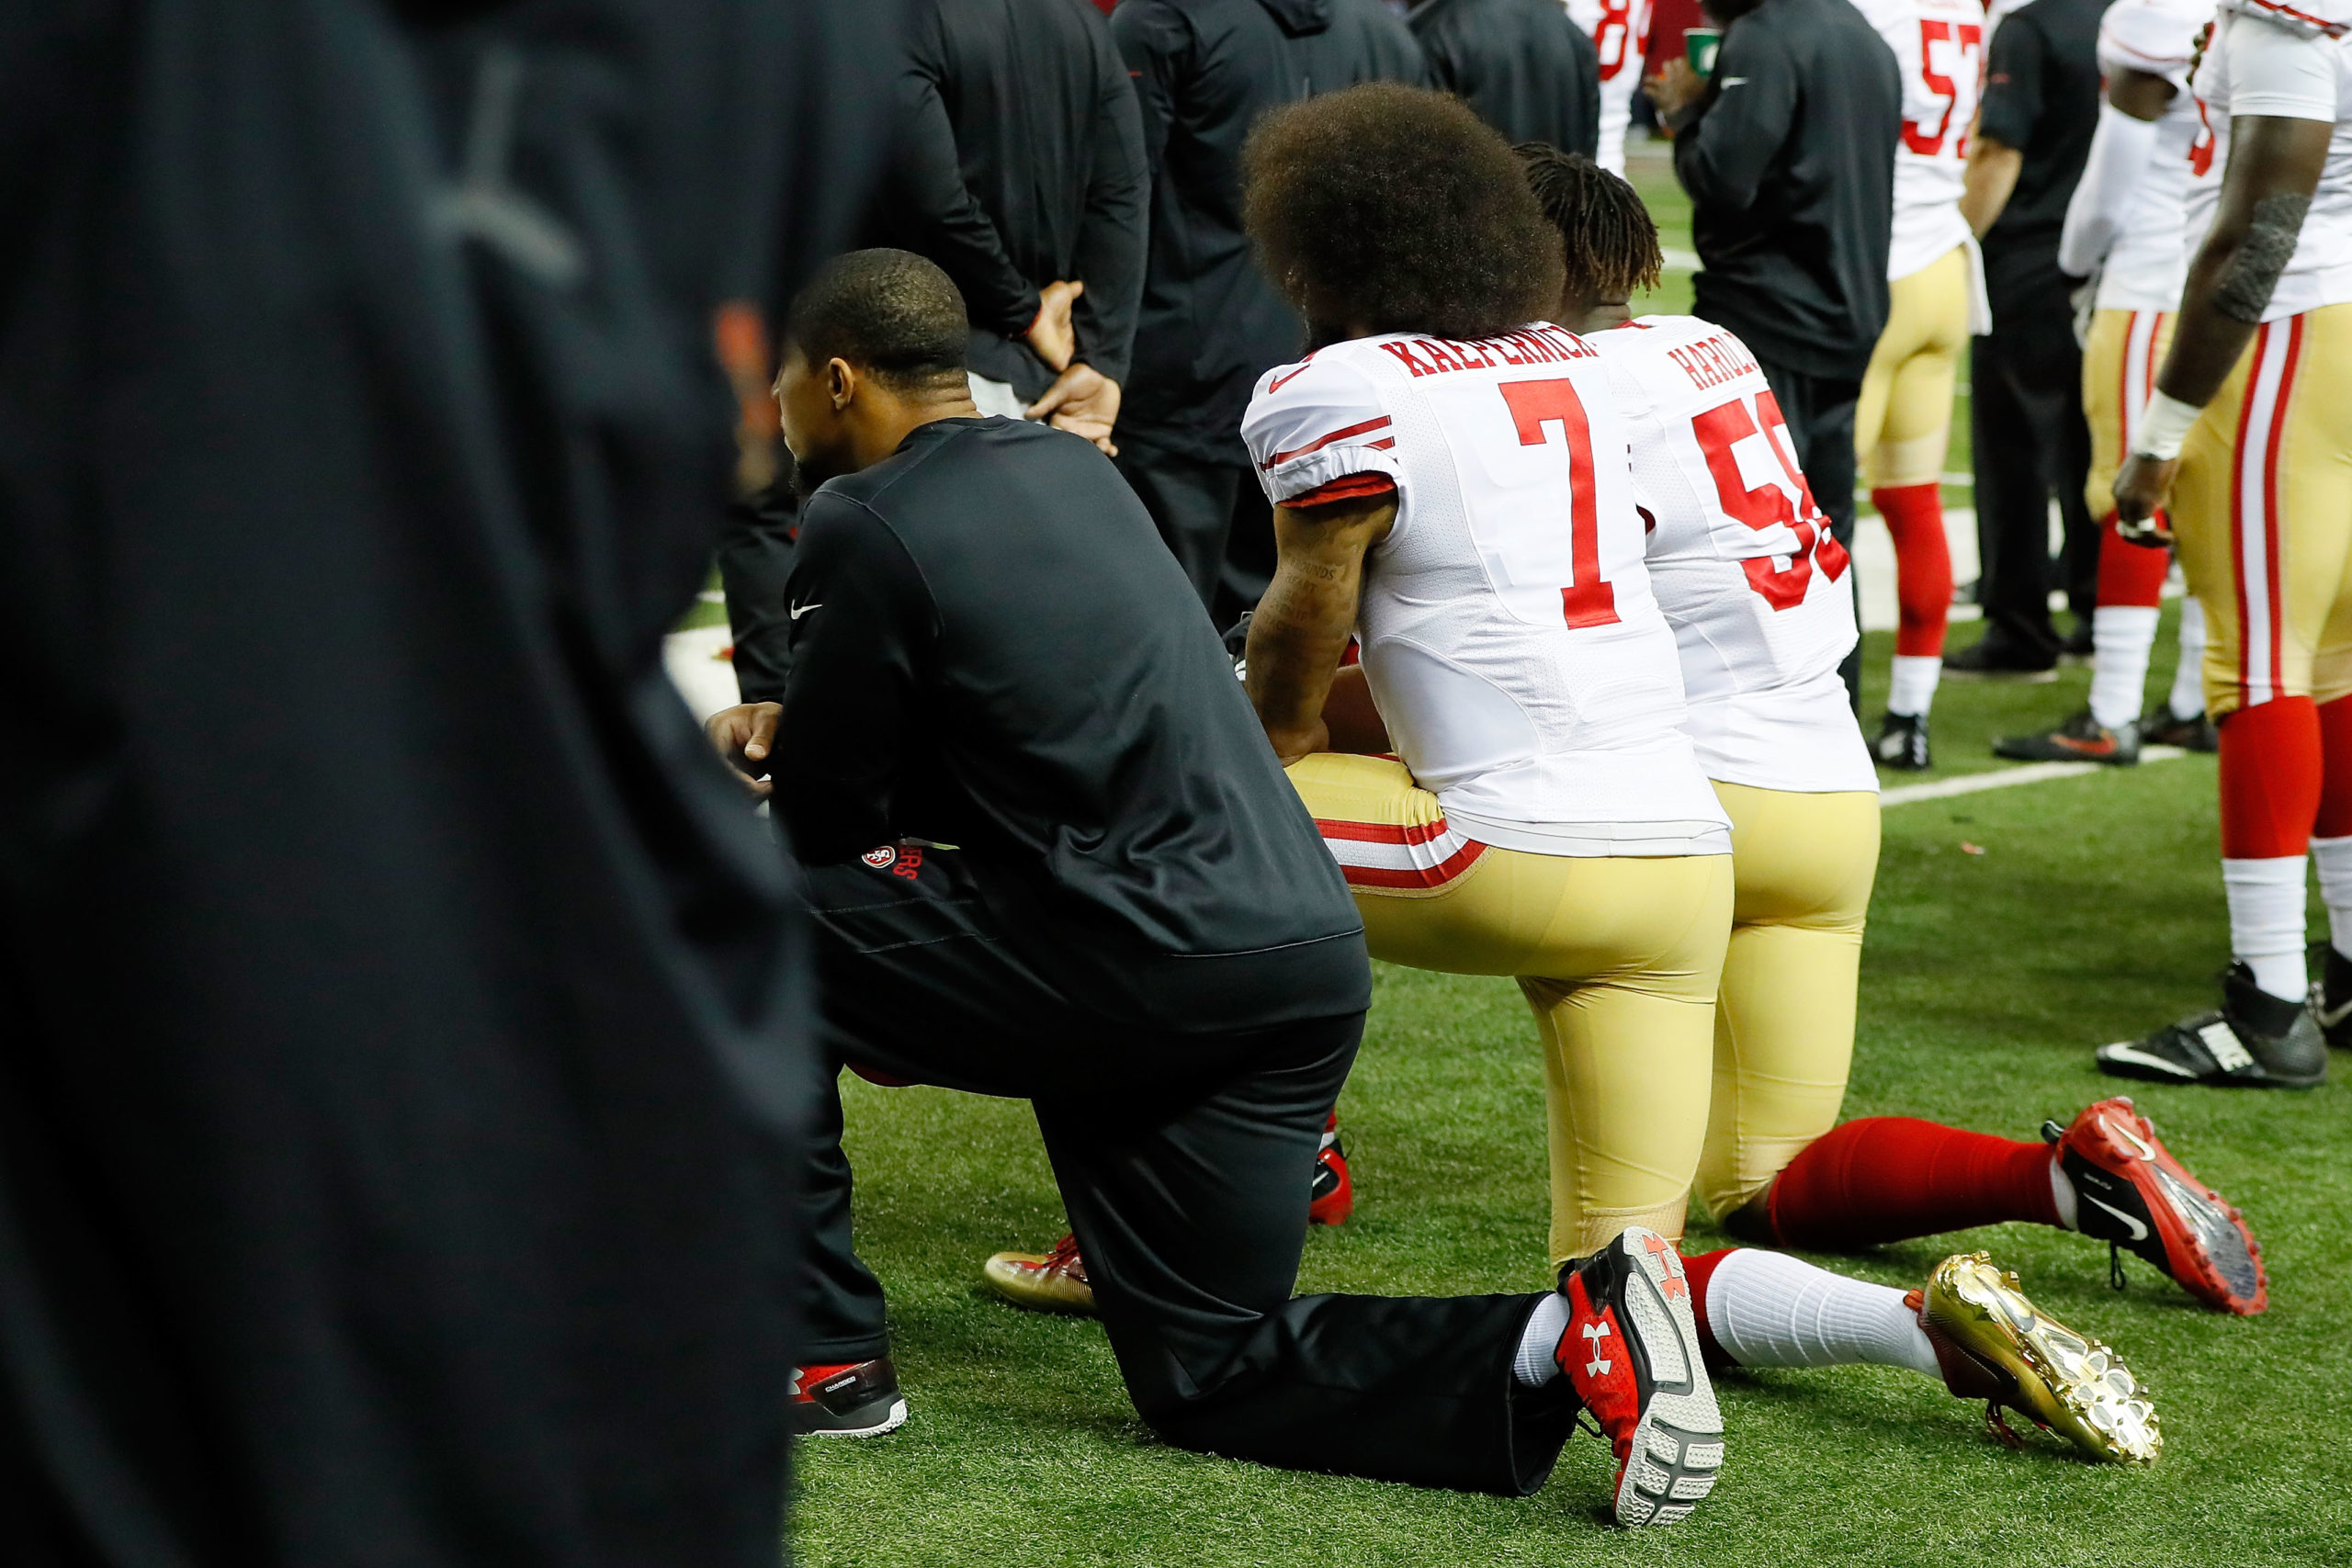 Colin Kaepernick of the San Francisco 49ers and Eli Harold kneel during the National Anthem. (Photo by Kevin C. Cox/Getty Images)